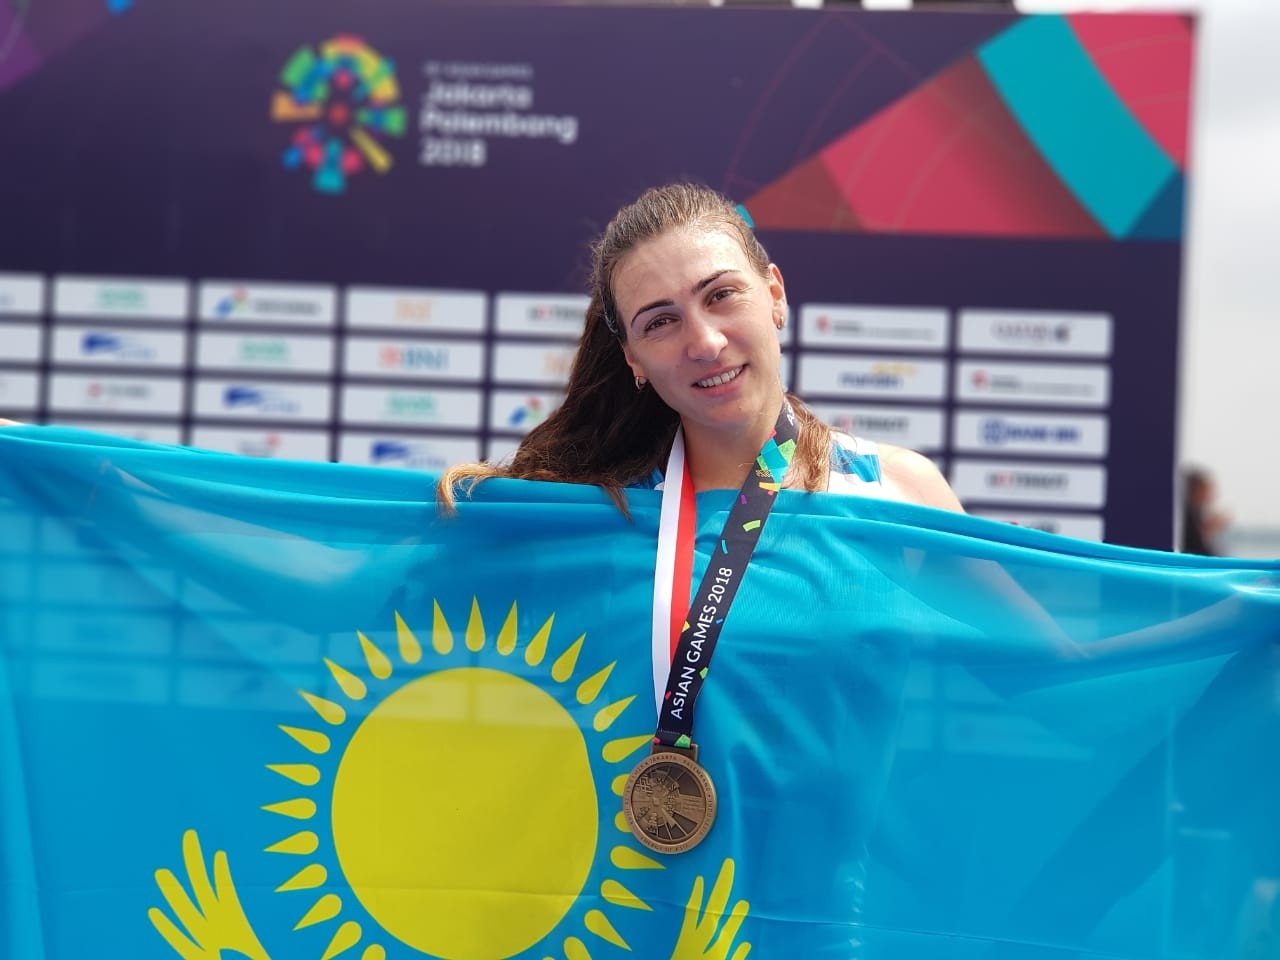 Alexandra Opachanova wins bronze medal in rowing at the Asian Games 2018